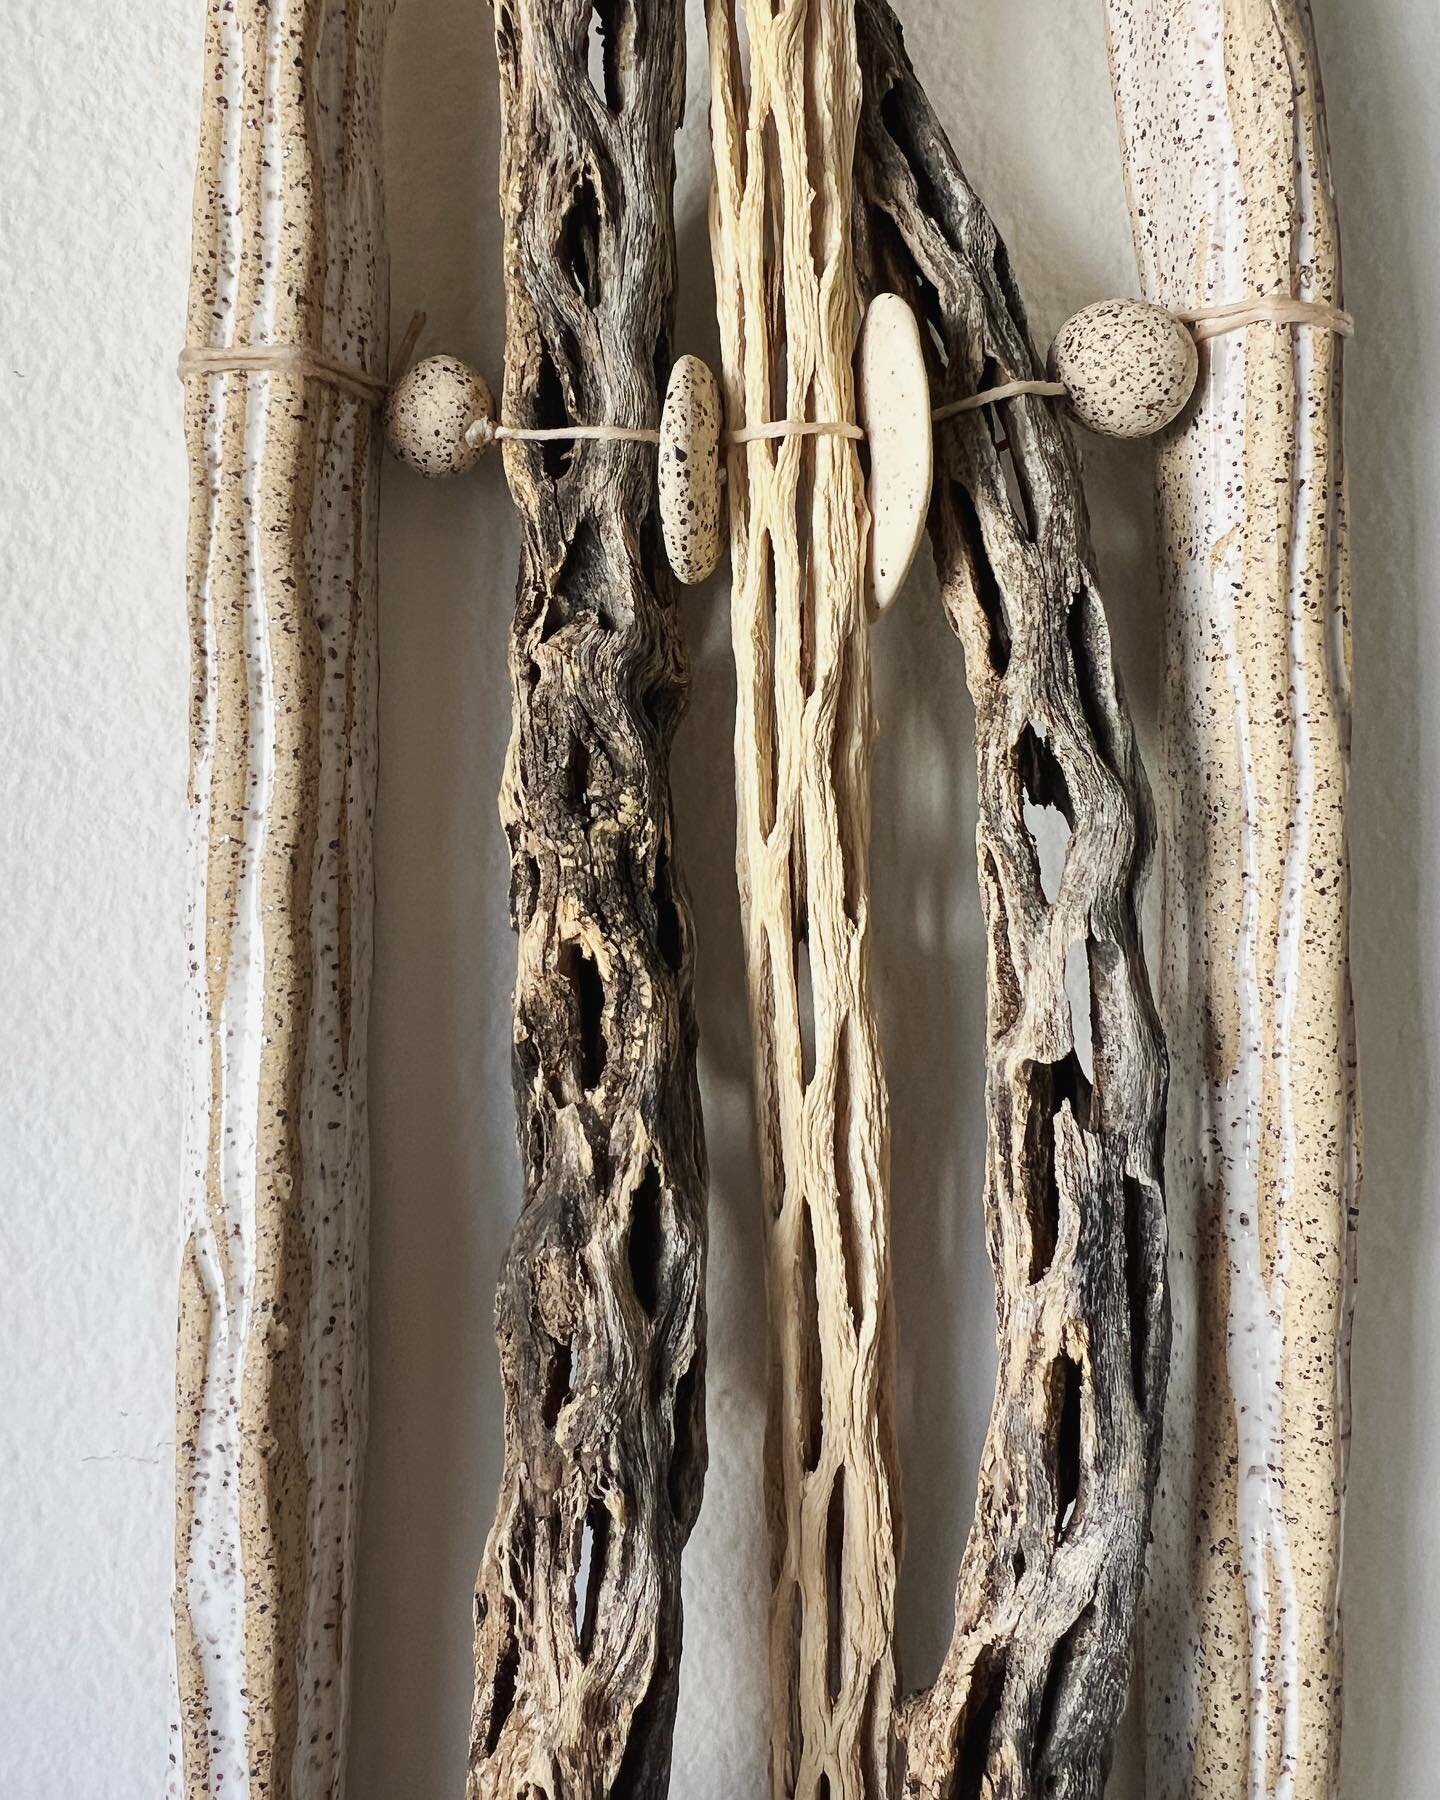 Dried up desert decor. ☀️❤️🏜️🌵

Cactus bones have been on my mind since I met Roxanne last July in Ann Arbor. She&rsquo;s a very talented fiber artist @dyefordesignart and she presented me with this new material. She collected the cactus bones (the